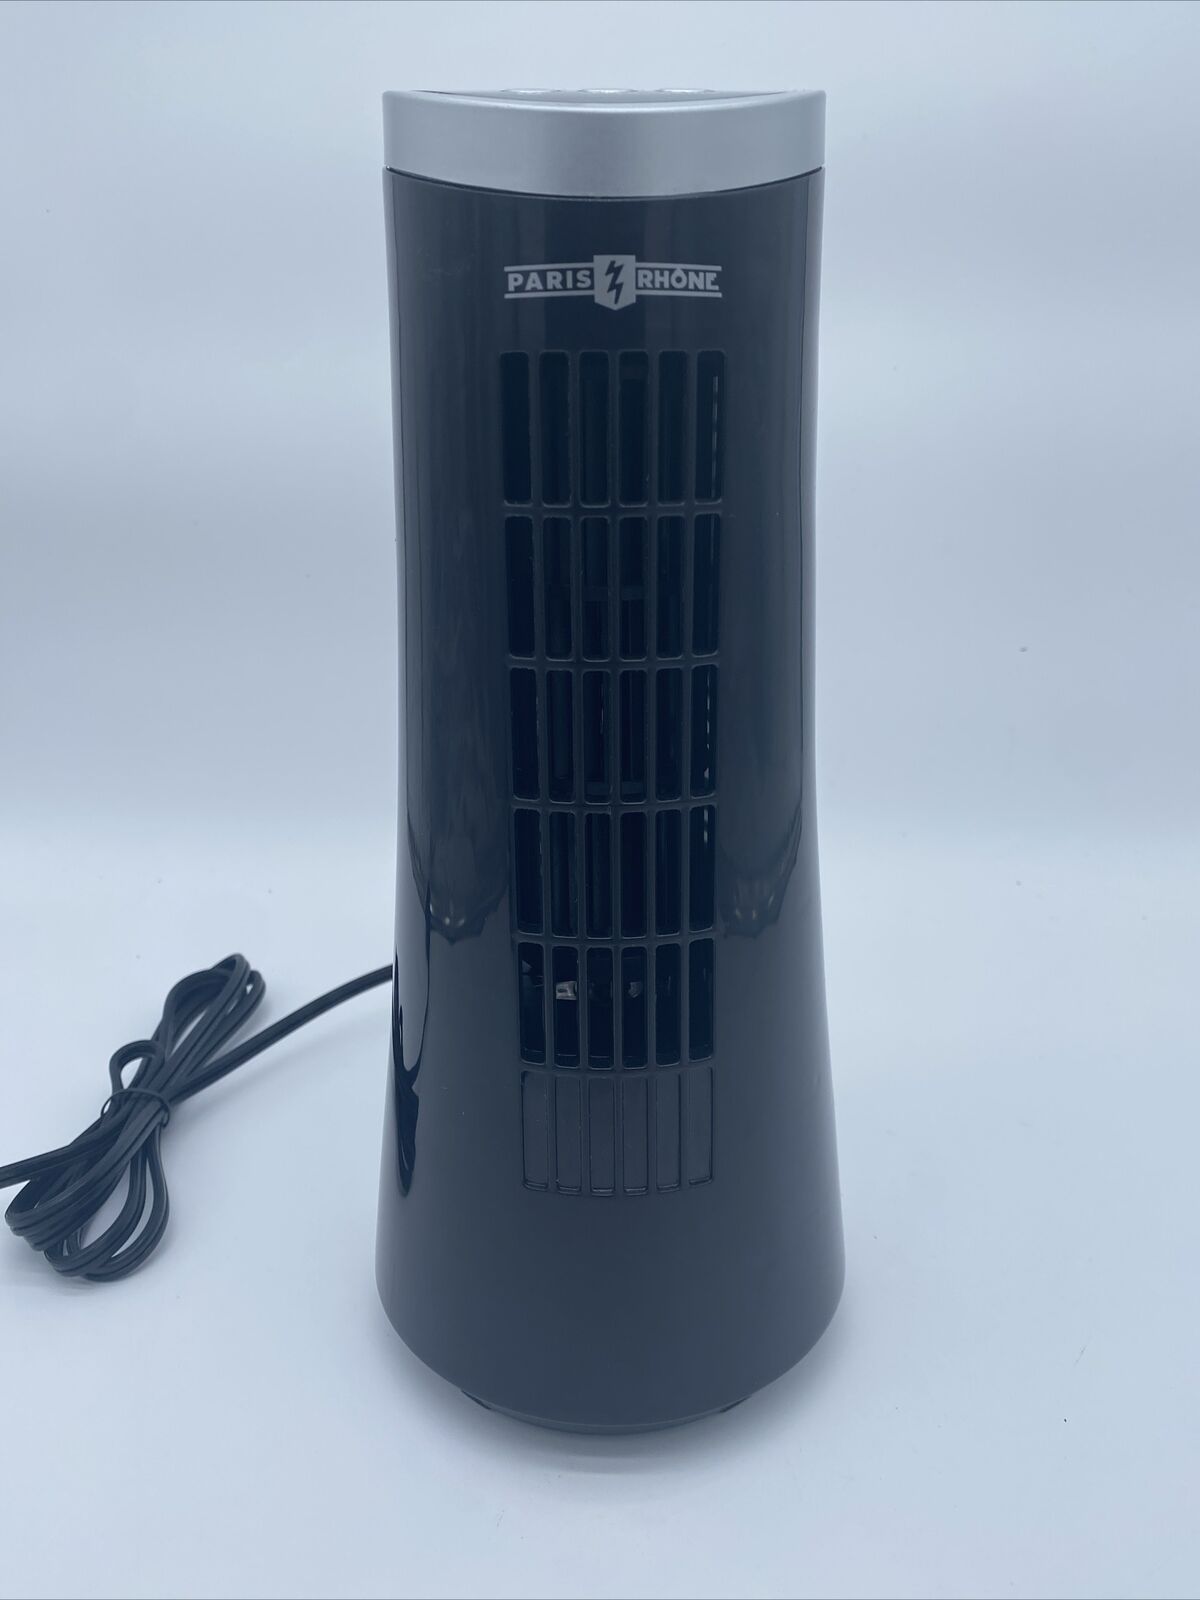 Paris Rhône 12” Tall Oscillating Portable Tower Fan Perfect For Your Desk